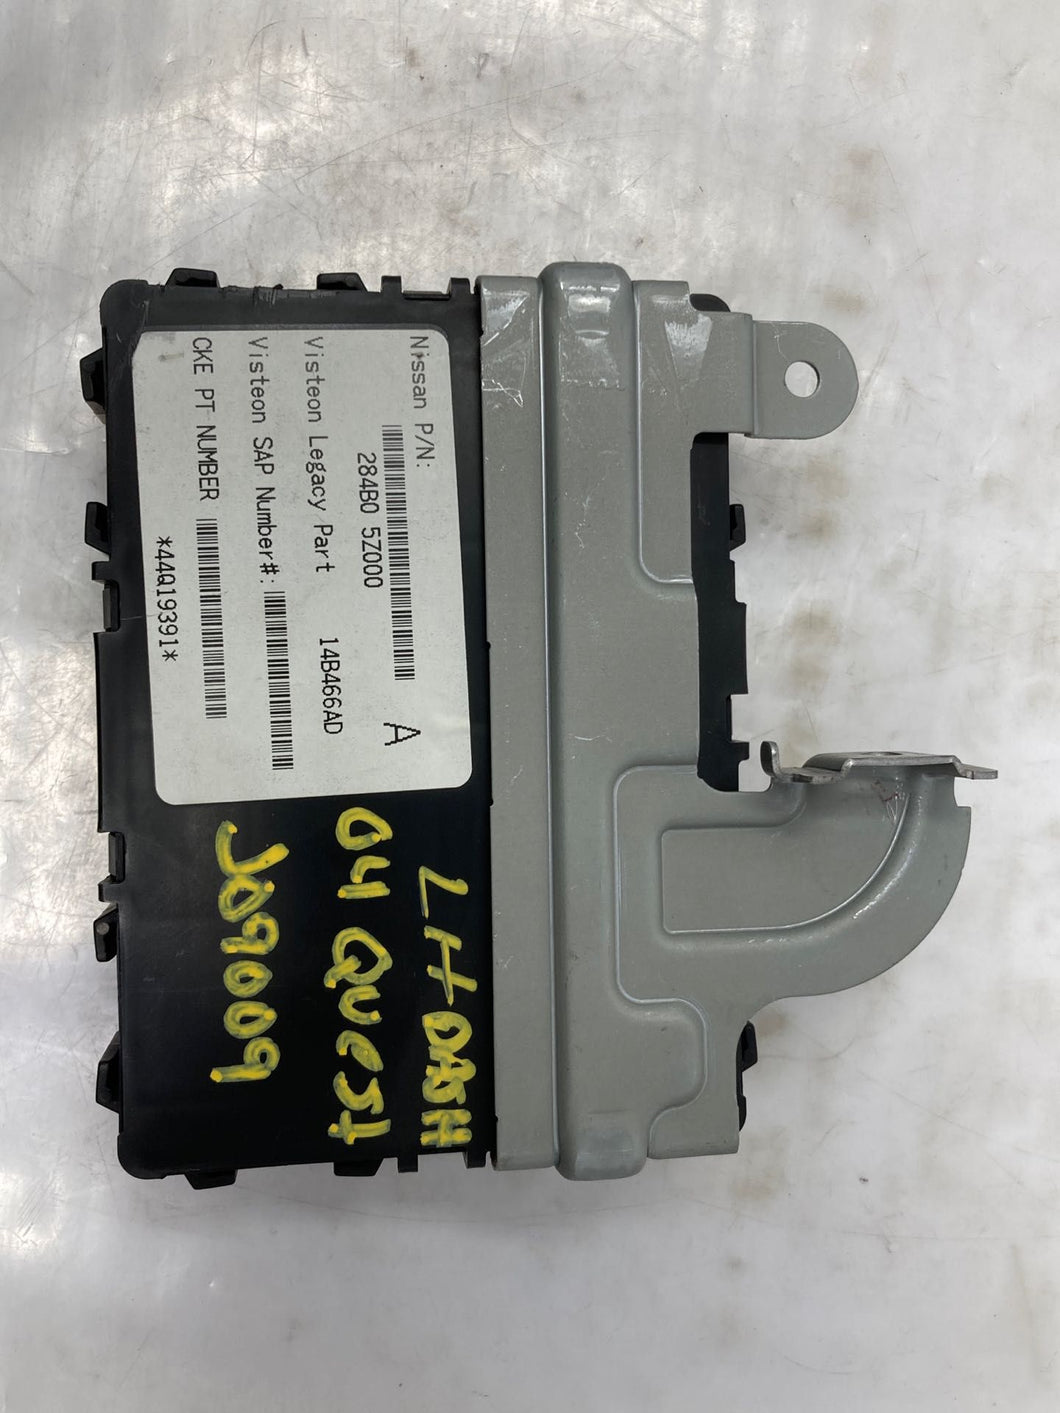 BODY CONTROL COMPUTER NISSAN QUEST 2004 2005 - NW501825